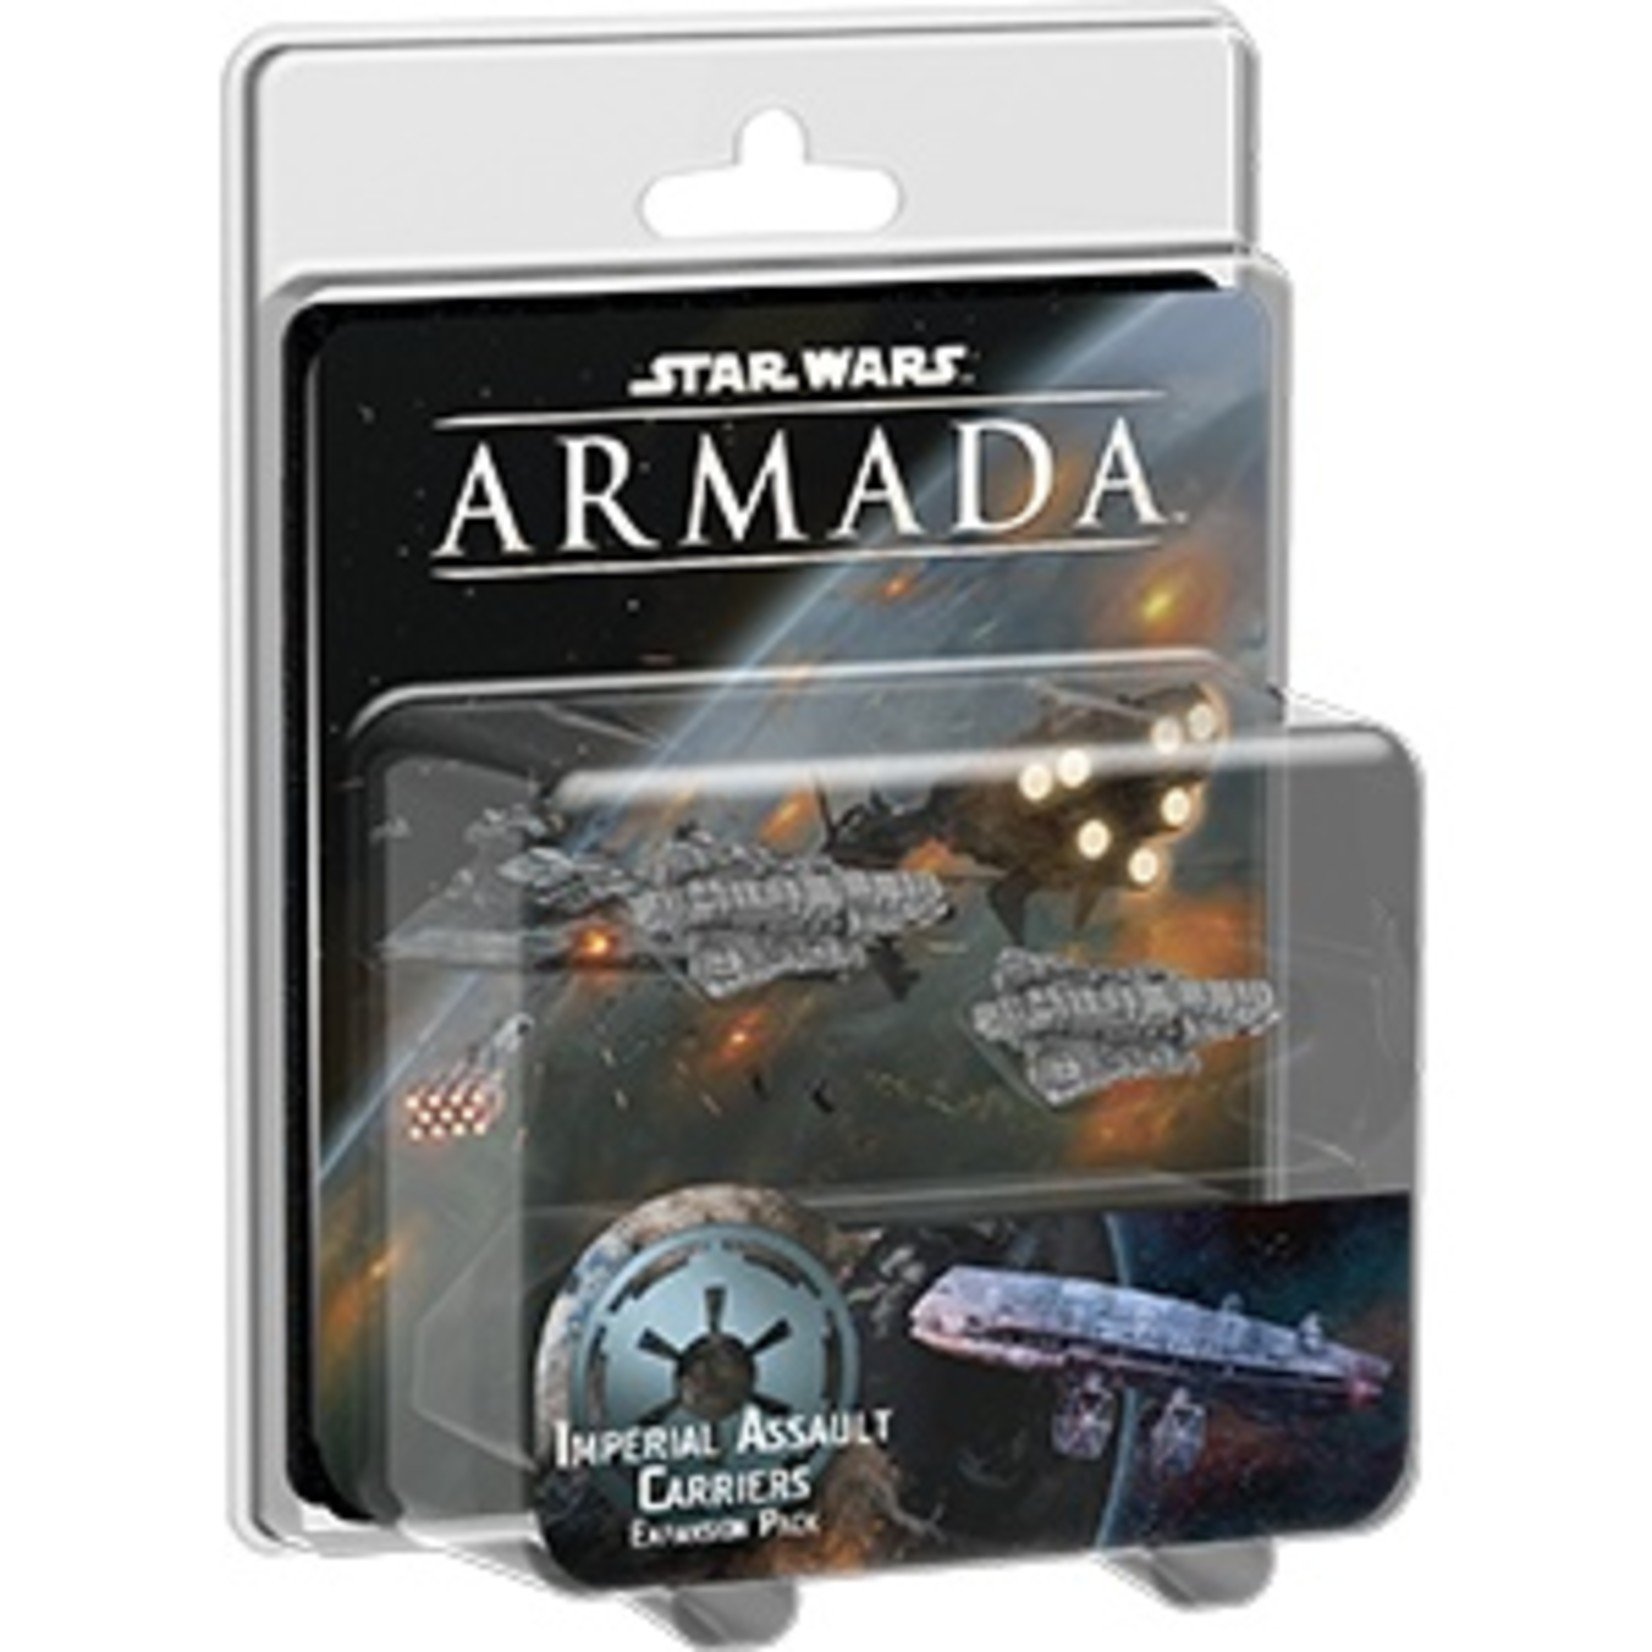 Fantasy Flight Games Star Wars: Armada - Imperial Assault Carriers Expansion Pack